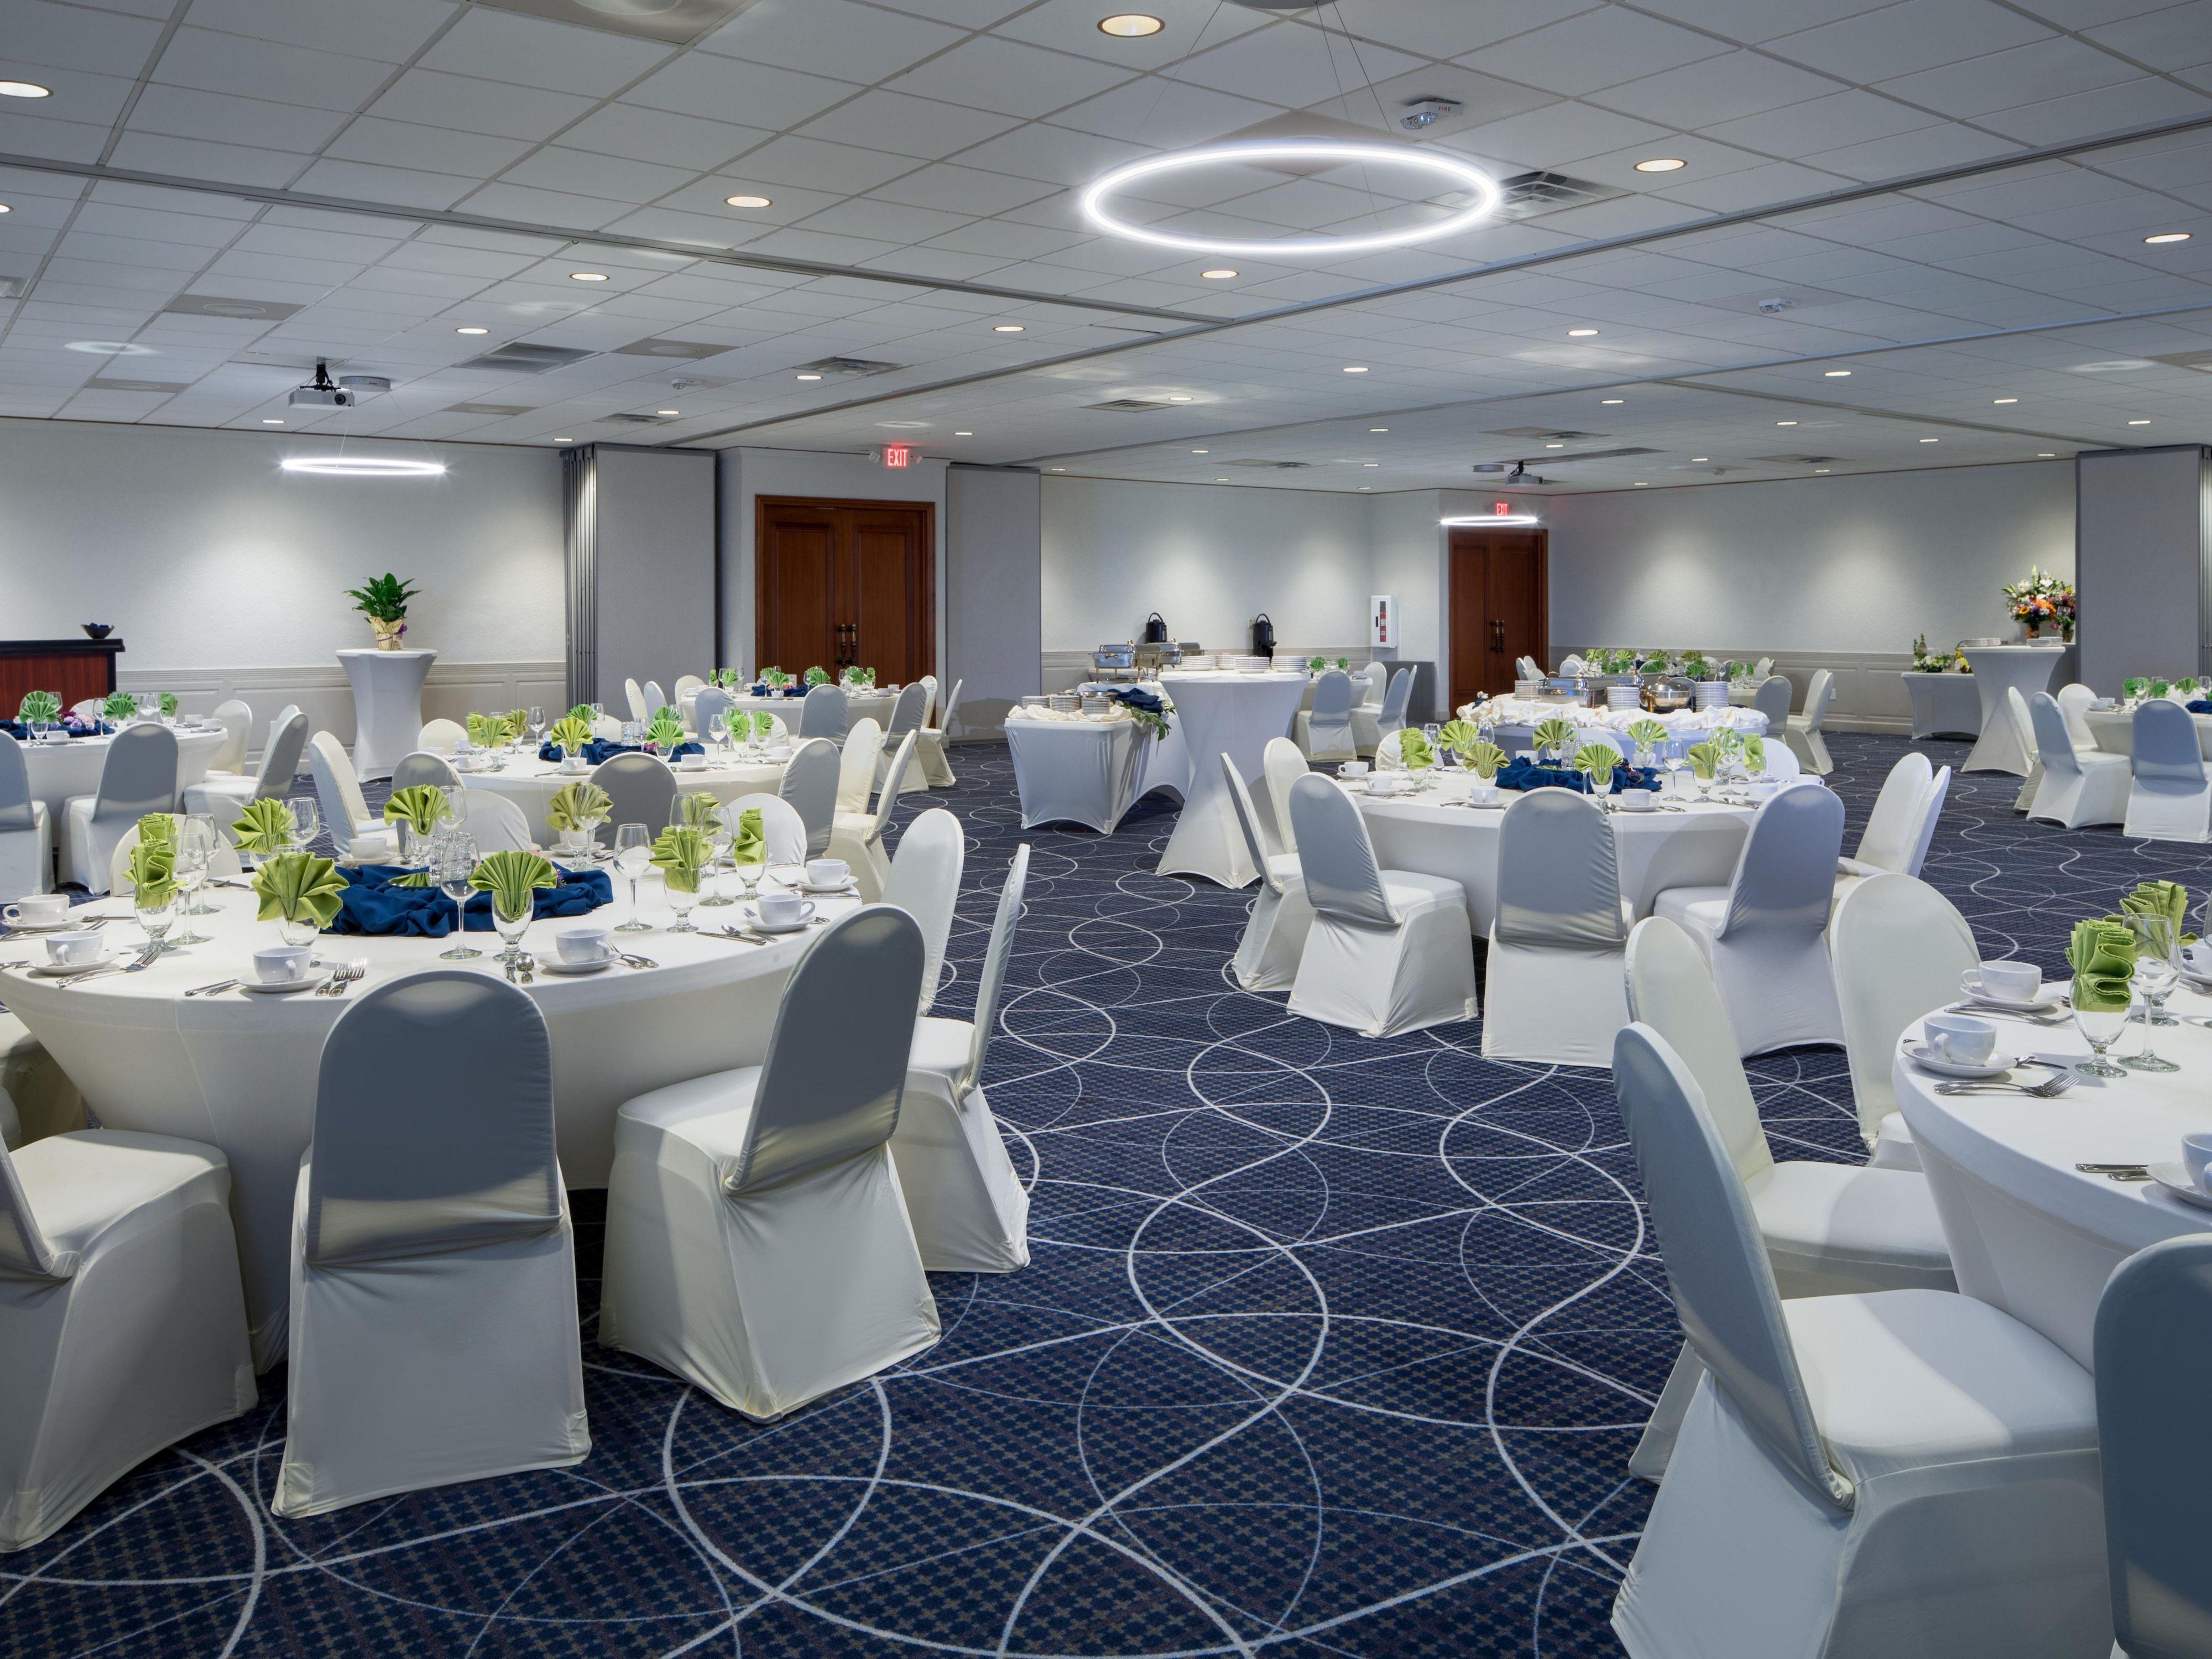 With a capacity for up to 350 guests, our event venues are ideal for every occasion, from wedding receptions to business seminars. Our meeting rooms feature state-of-the-art WeFrame meeting technology to bring your event to the next level. We are also proud to offer in-house catering and event planning services.